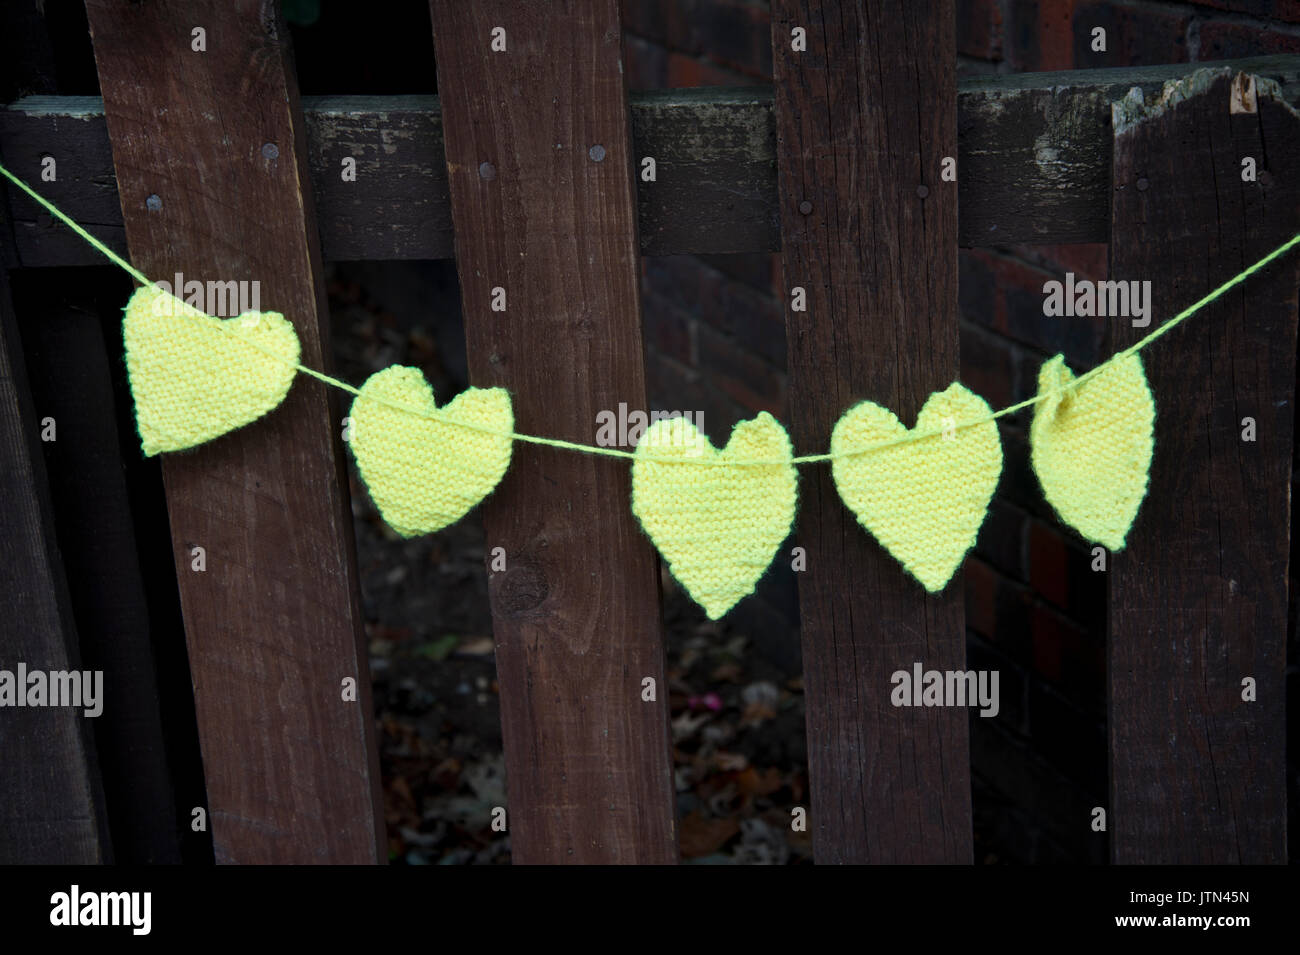 Grenfell Tower, West London. Aftermath of the tragedy. Yellow crocheted hearts to honour the missing Stock Photo